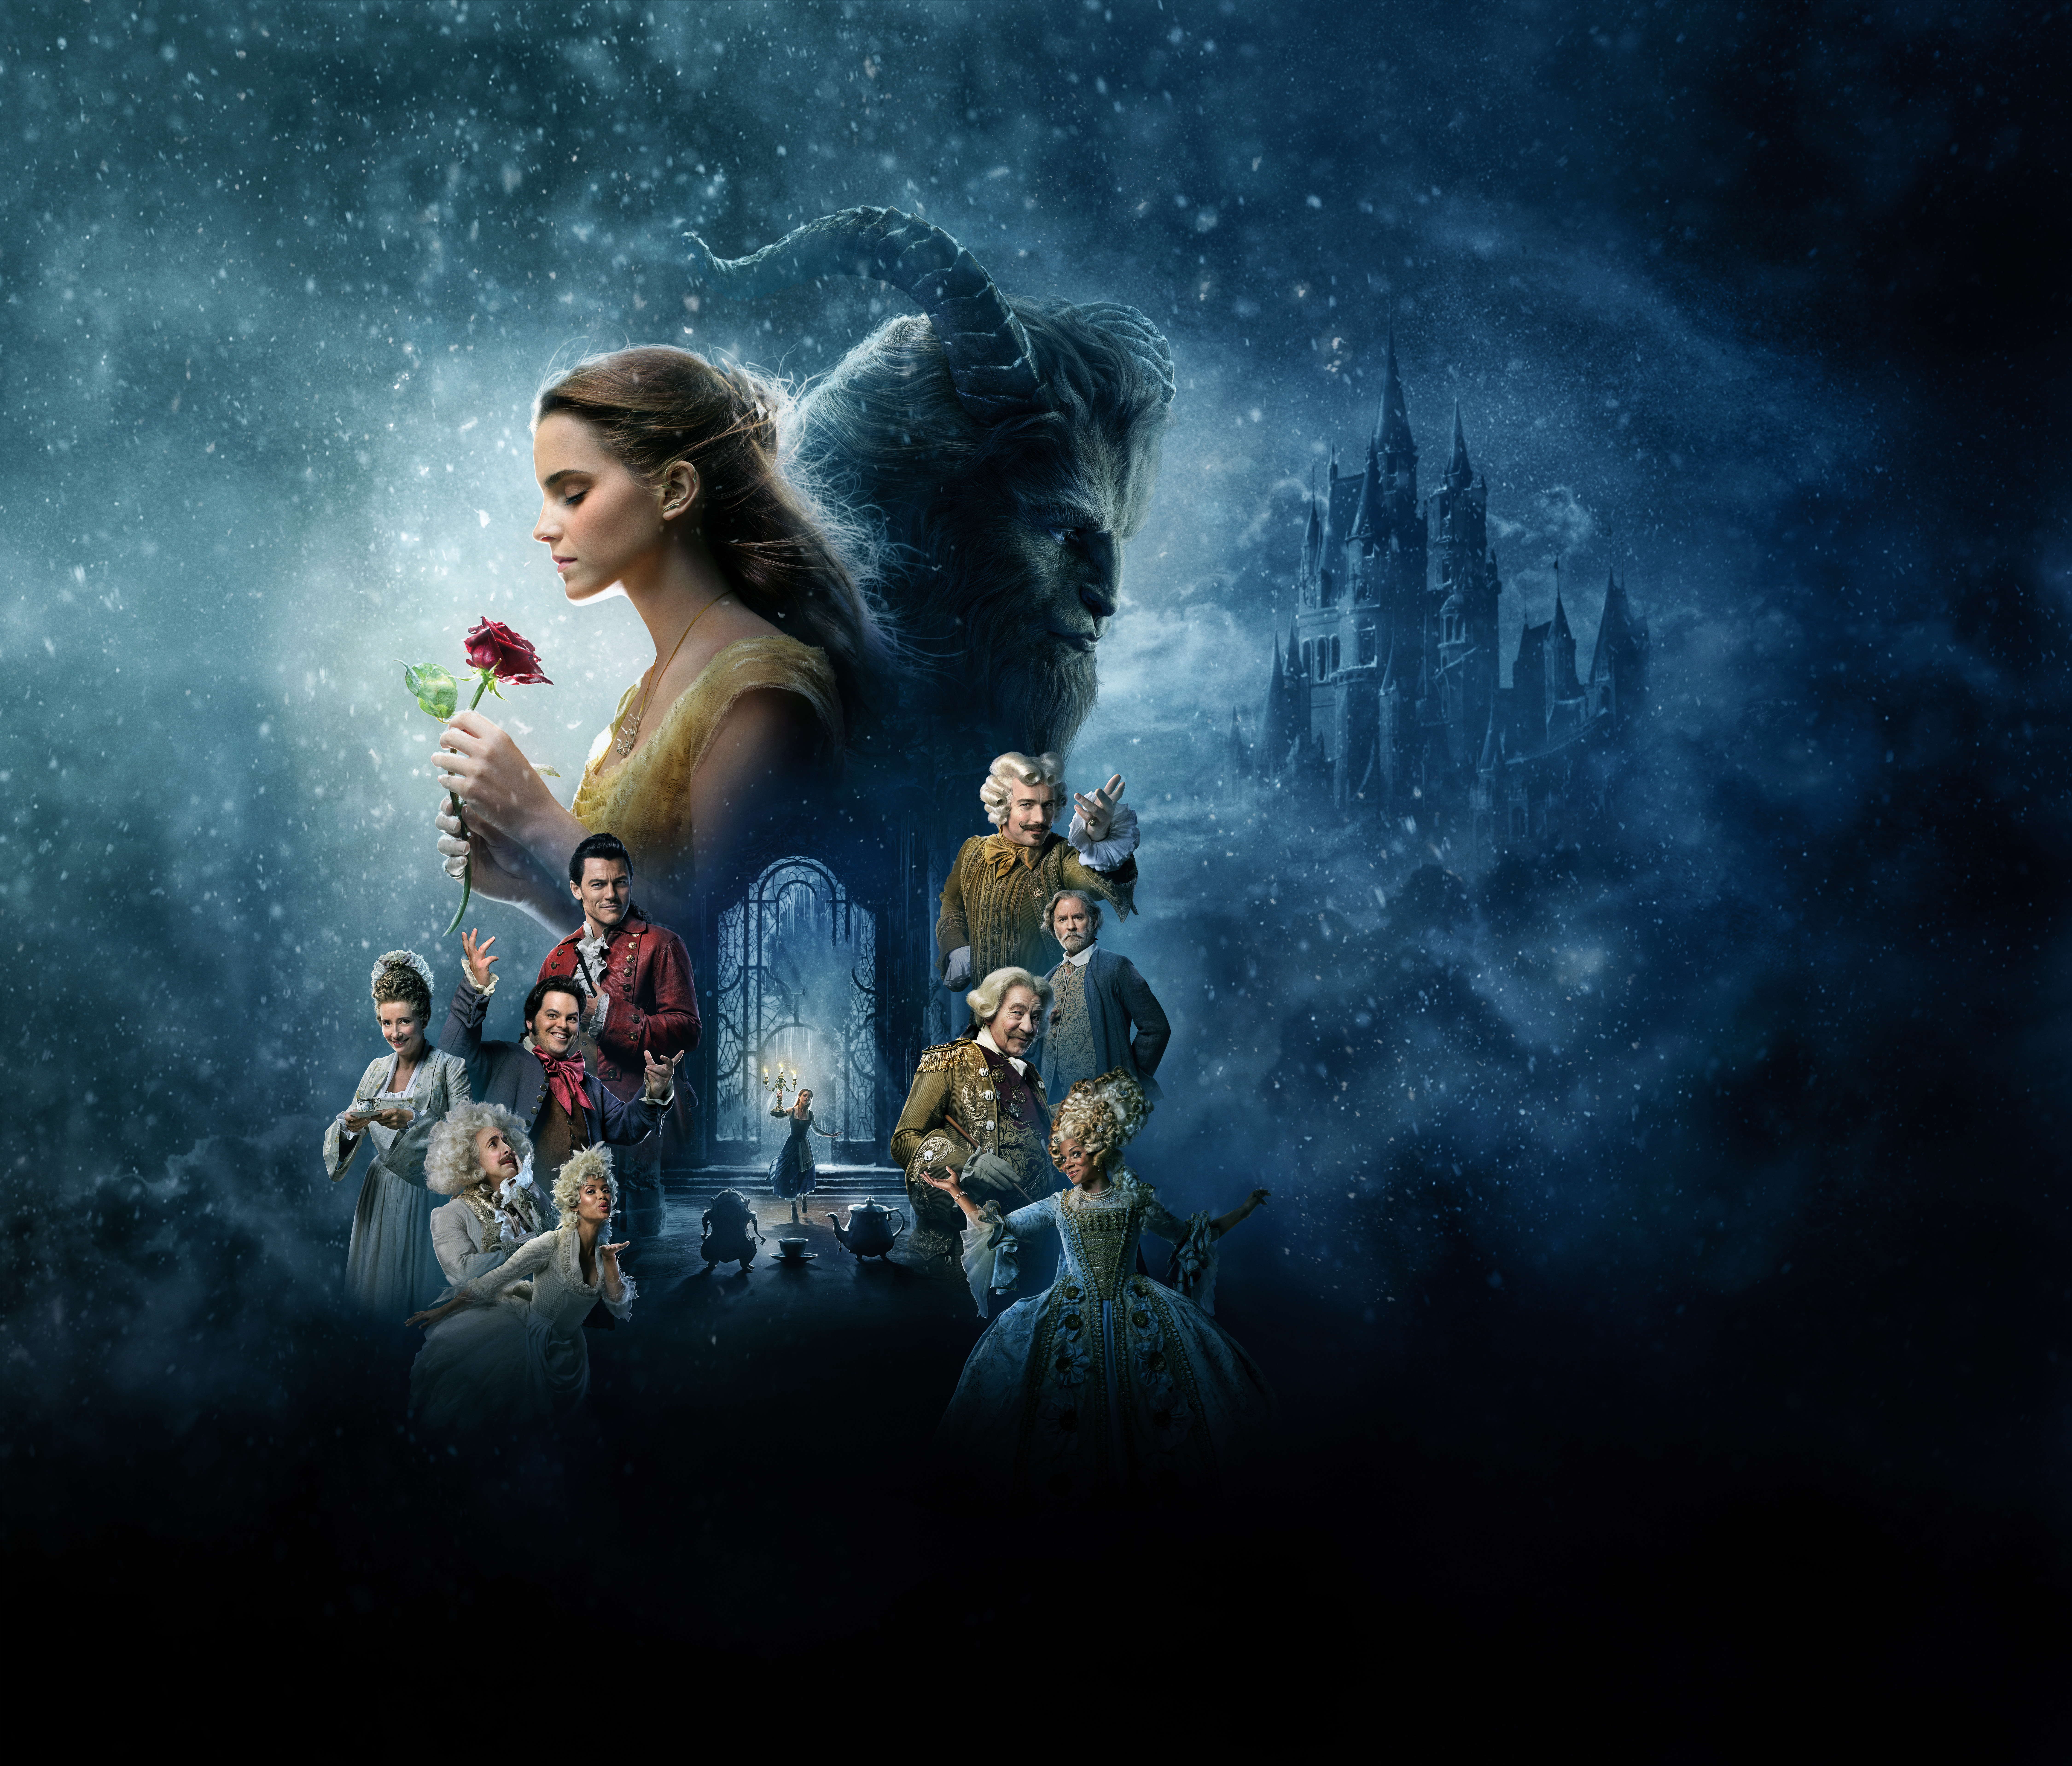 Wallpapers melodrama musical Beauty and the beast 2017 on the desktop